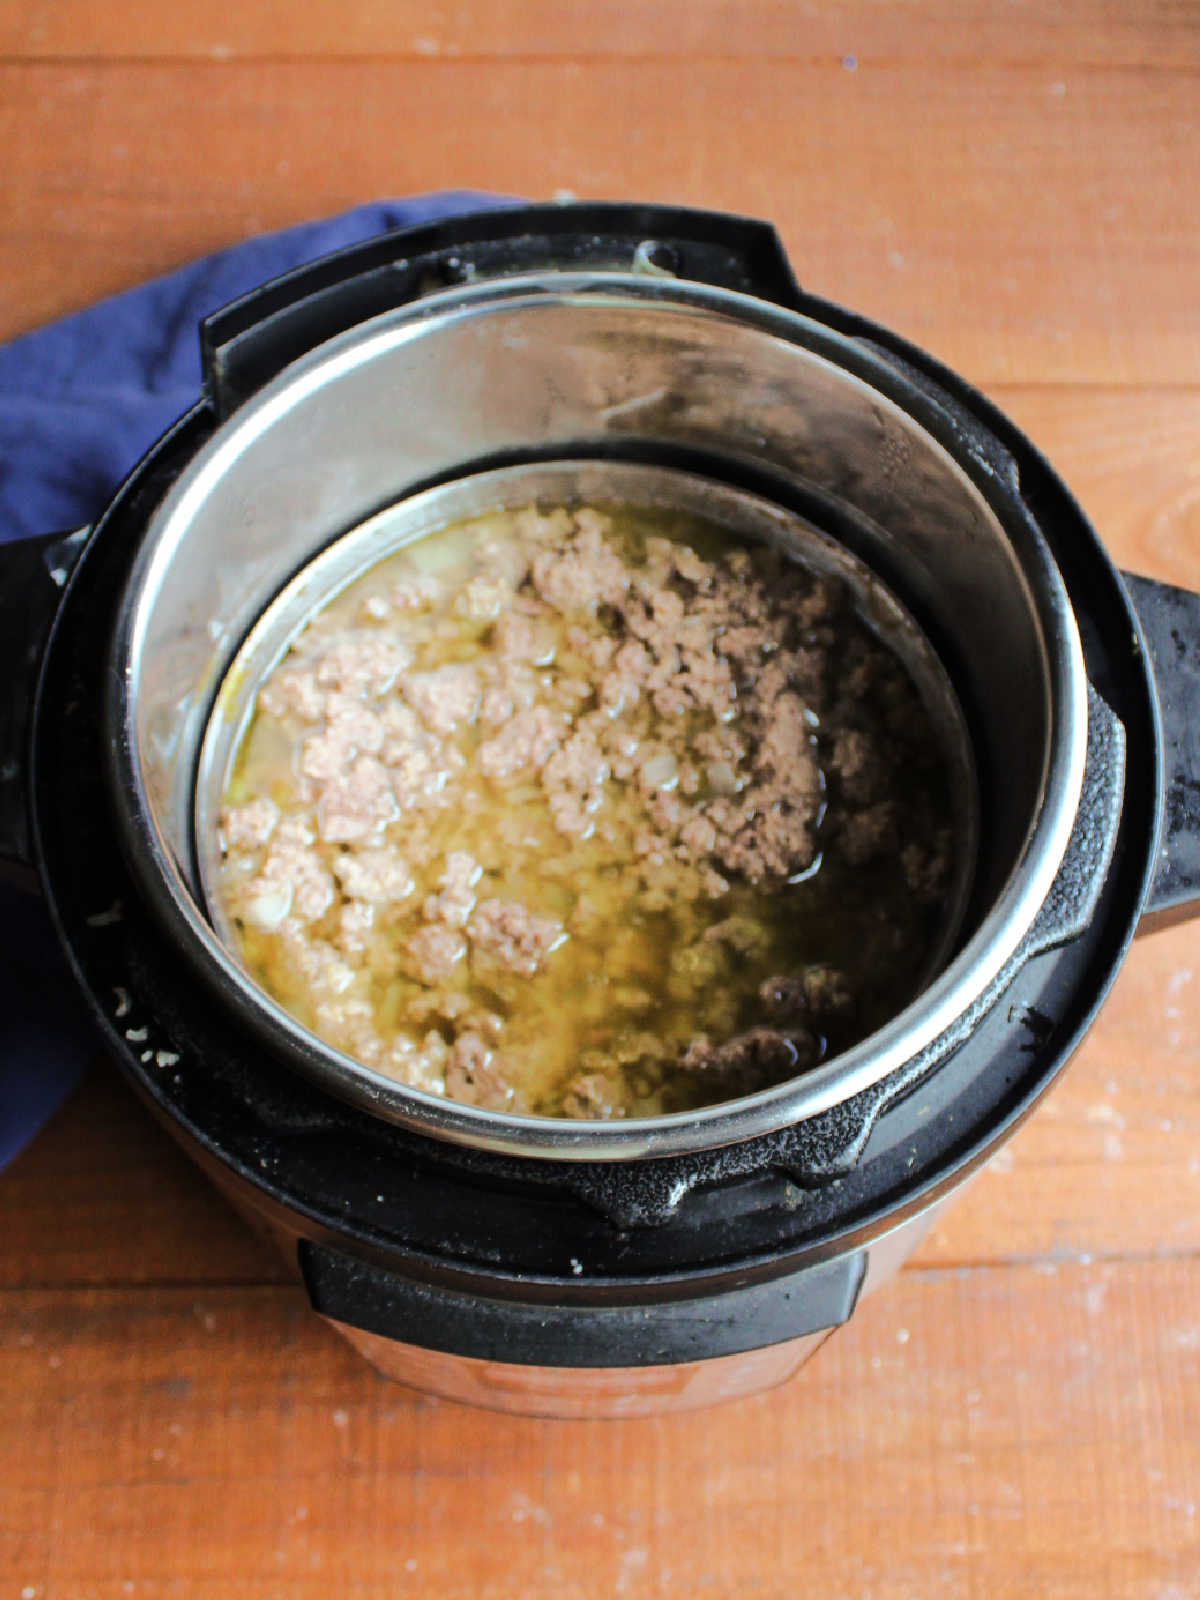 Cooked maid rite mixture inside instant pot.